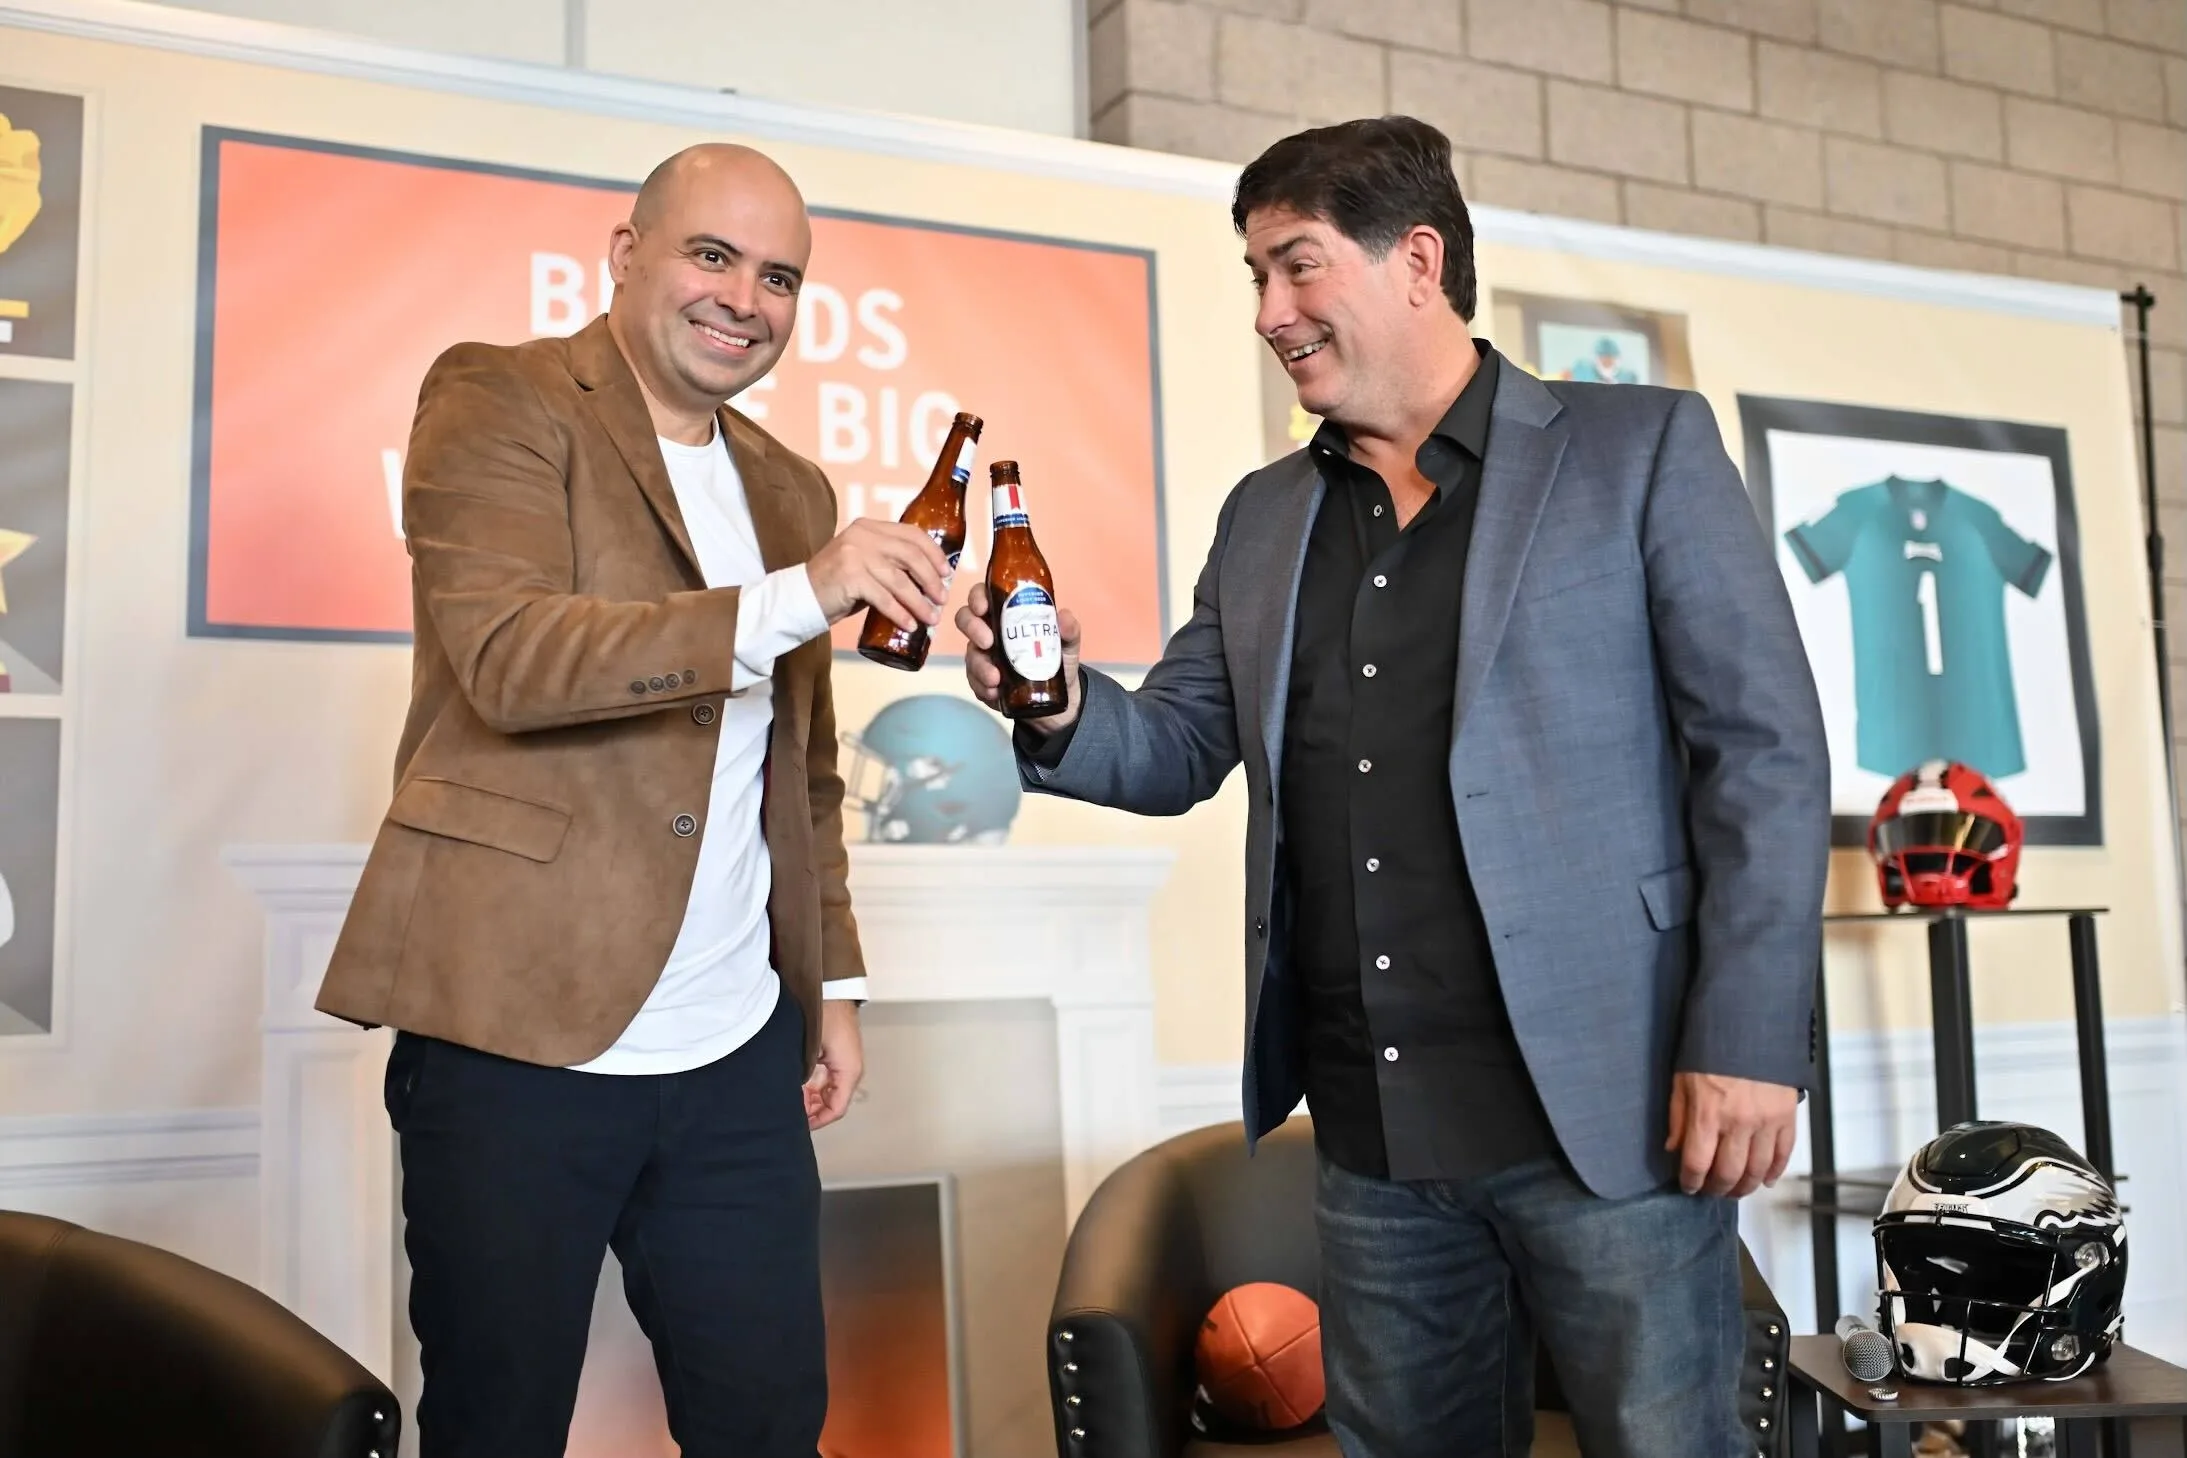 Ricardo Marques, VP of Marketing, Michelob ULTRA, Anheuser-Busch InBev and Mike Ford, CEO, Skydeo